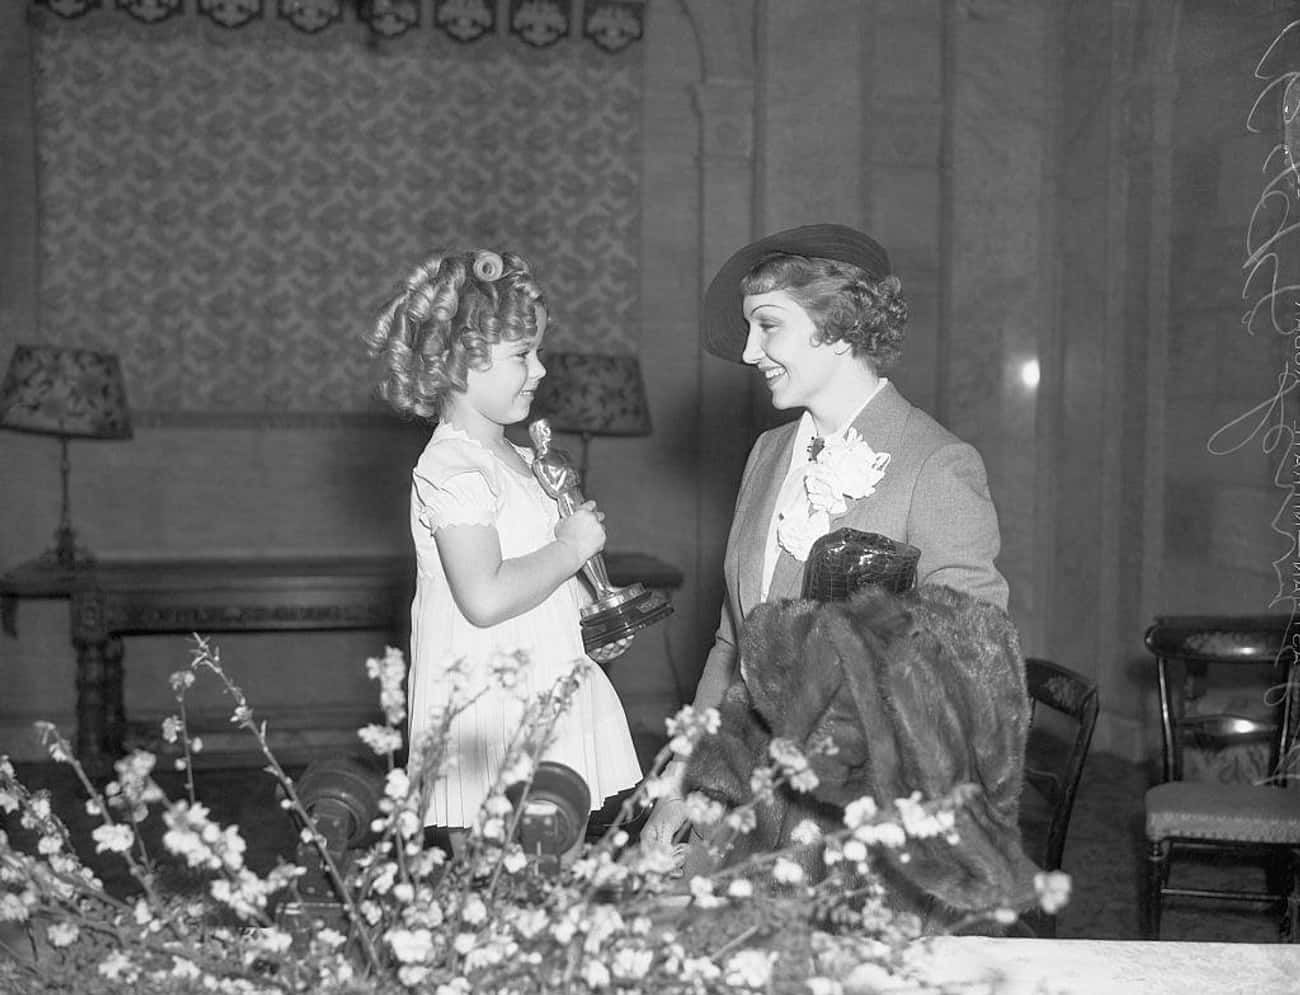 Shirley Temple Presents An Oscar To Claudette Colbert, 1935